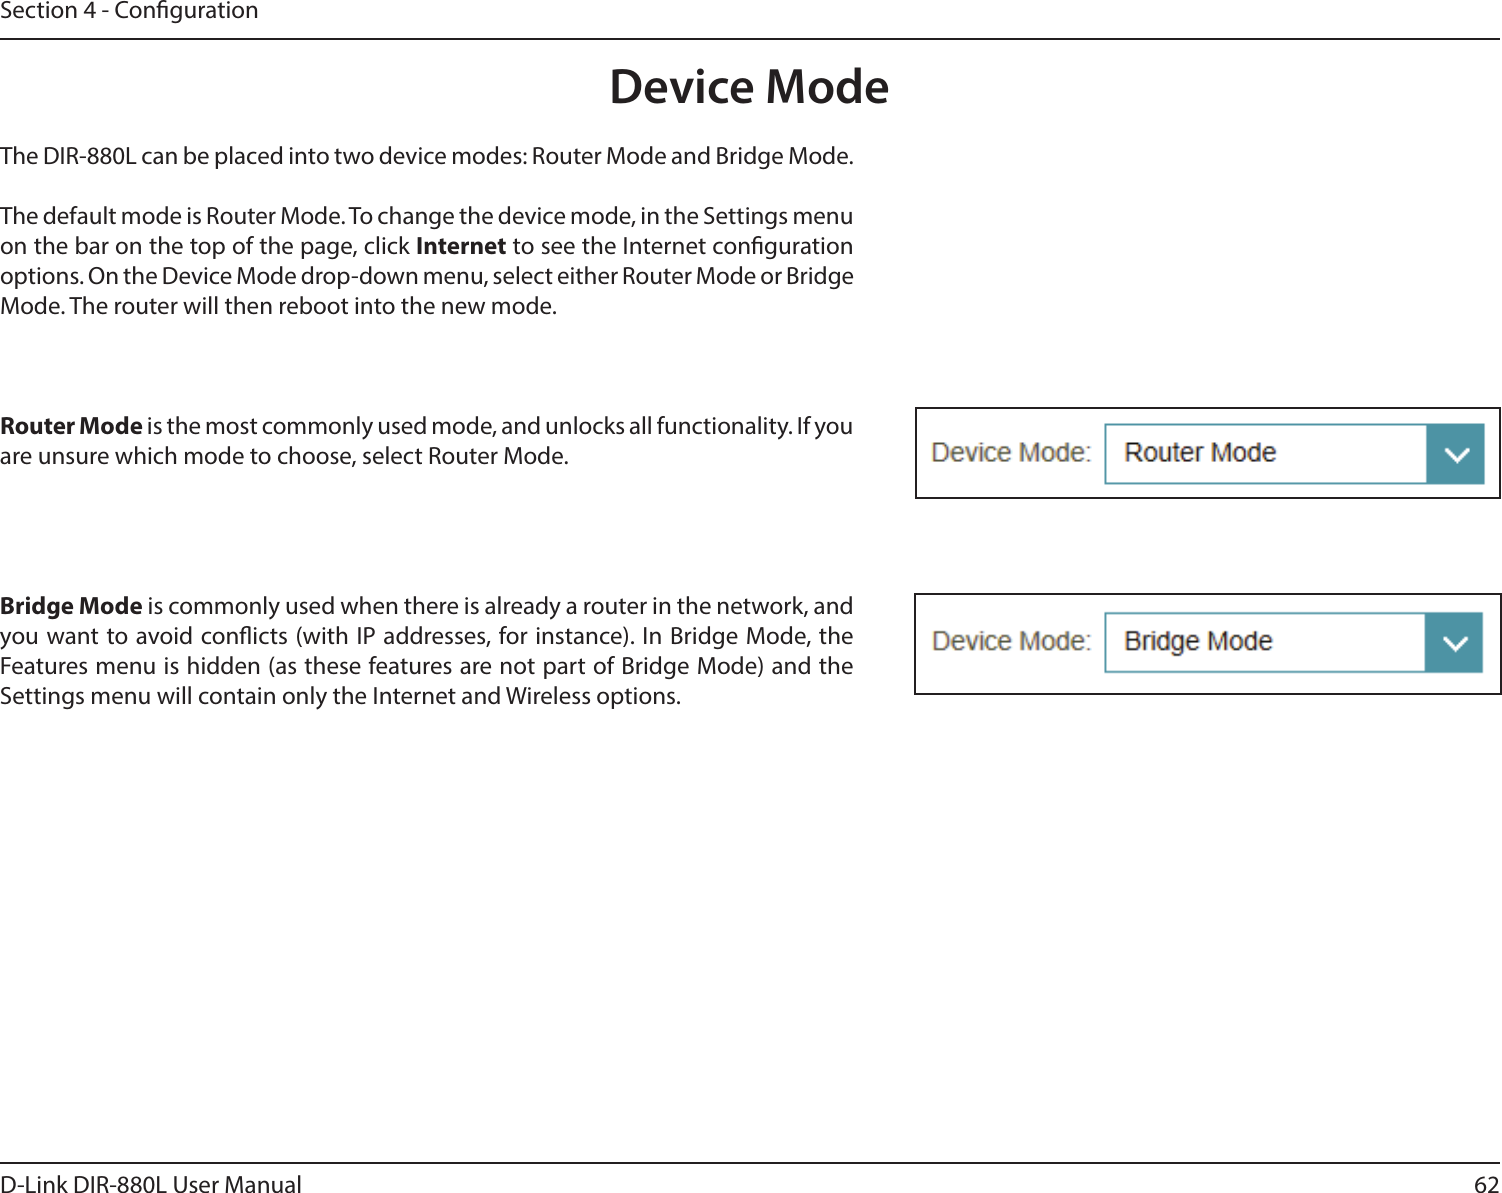 62D-Link DIR-880L User ManualSection 4 - CongurationDevice ModeThe DIR-880L can be placed into two device modes: Router Mode and Bridge Mode.The default mode is Router Mode. To change the device mode, in the Settings menu on the bar on the top of the page, click Internet to see the Internet conguration options. On the Device Mode drop-down menu, select either Router Mode or Bridge Mode. The router will then reboot into the new mode.Router Mode is the most commonly used mode, and unlocks all functionality. If you are unsure which mode to choose, select Router Mode.Bridge Mode is commonly used when there is already a router in the network, and you want to avoid conicts (with IP addresses, for instance). In Bridge Mode, the Features menu is hidden (as these features are not part of Bridge Mode) and the Settings menu will contain only the Internet and Wireless options.